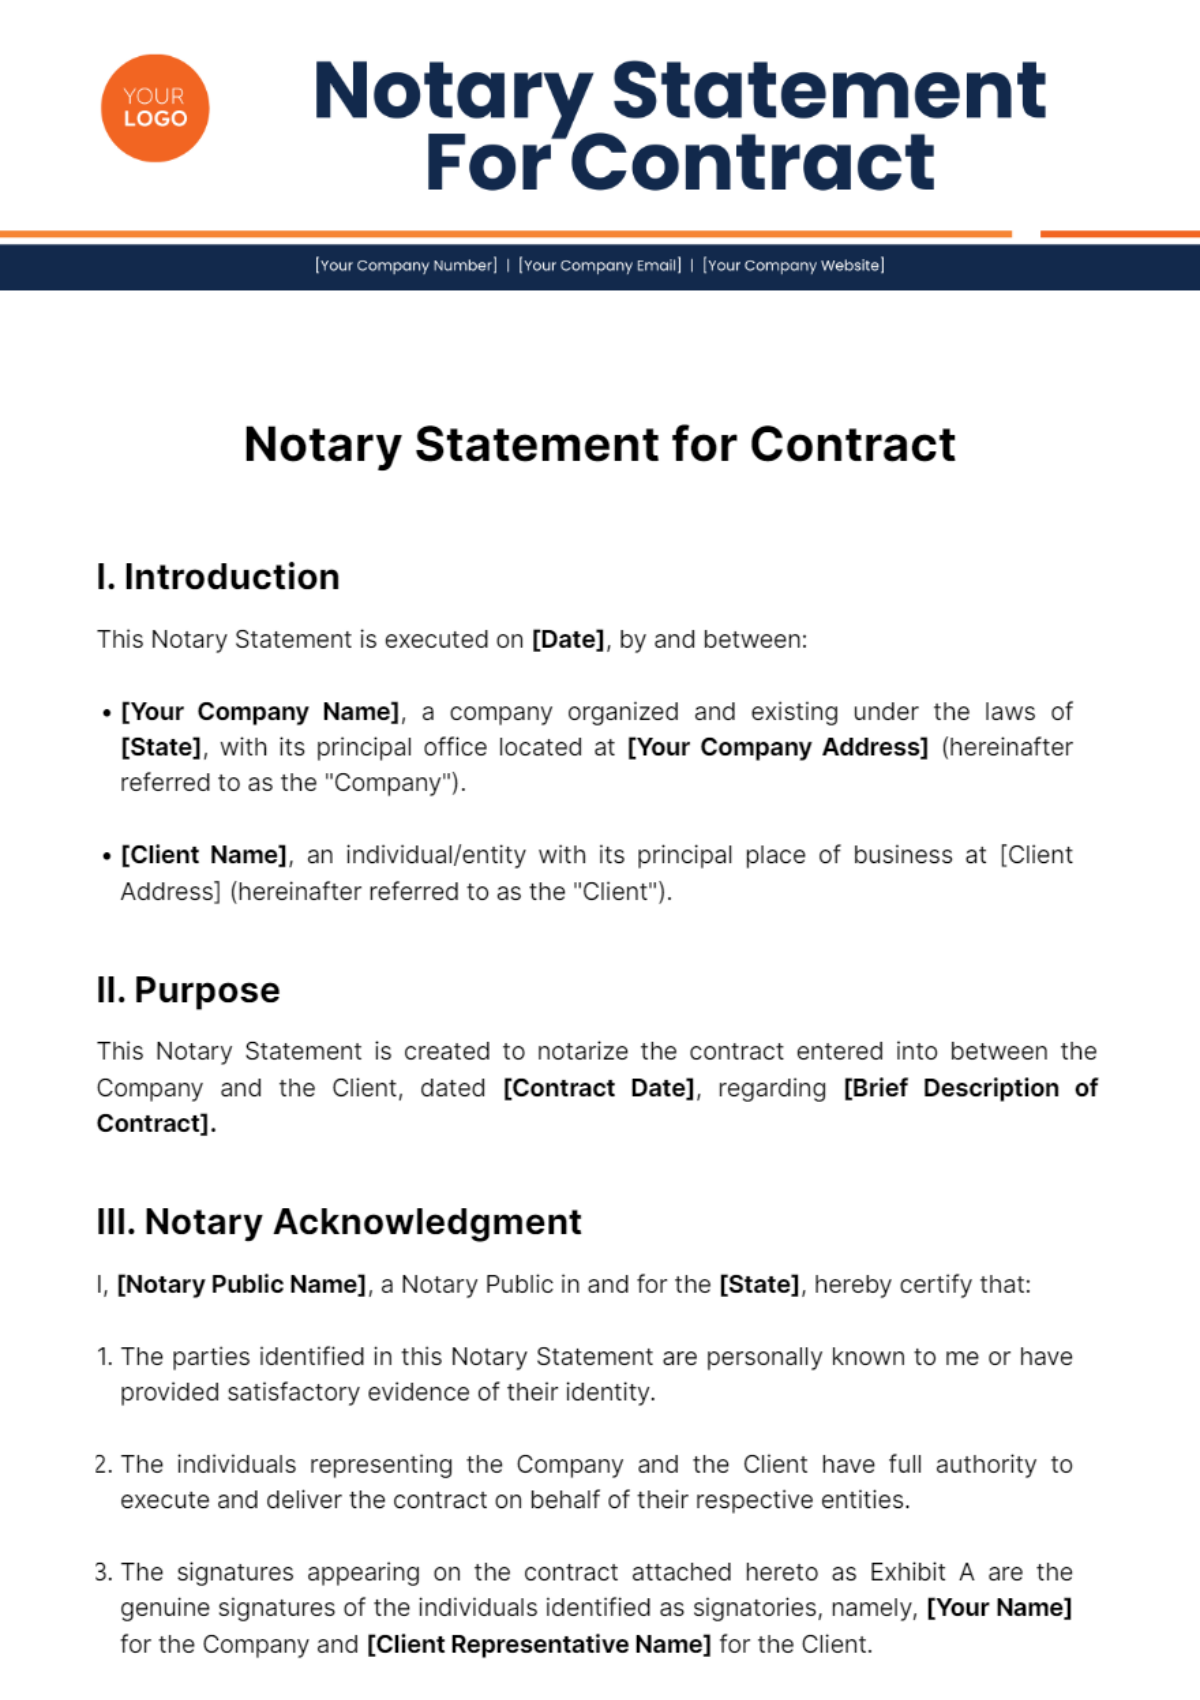 Free Notary Statement For Contract Template